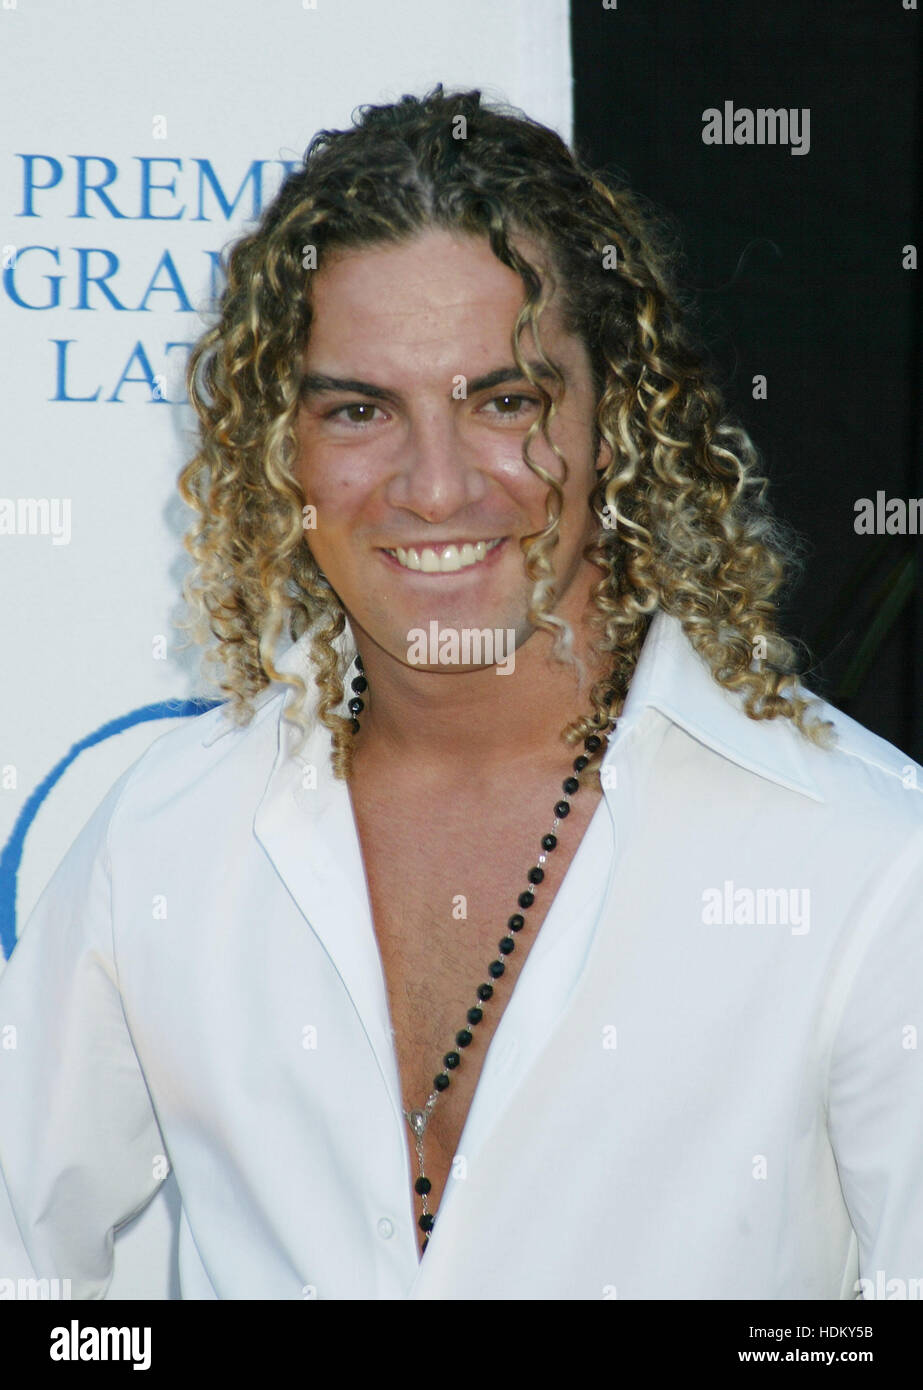 Spanish musician David Bisbal poses for photographers at the Latin Recording Academy Person of the Year Tribute to Carlos Santana in Los Angeles on August 30, 2004. Photo by Francis Specker Stock Photo